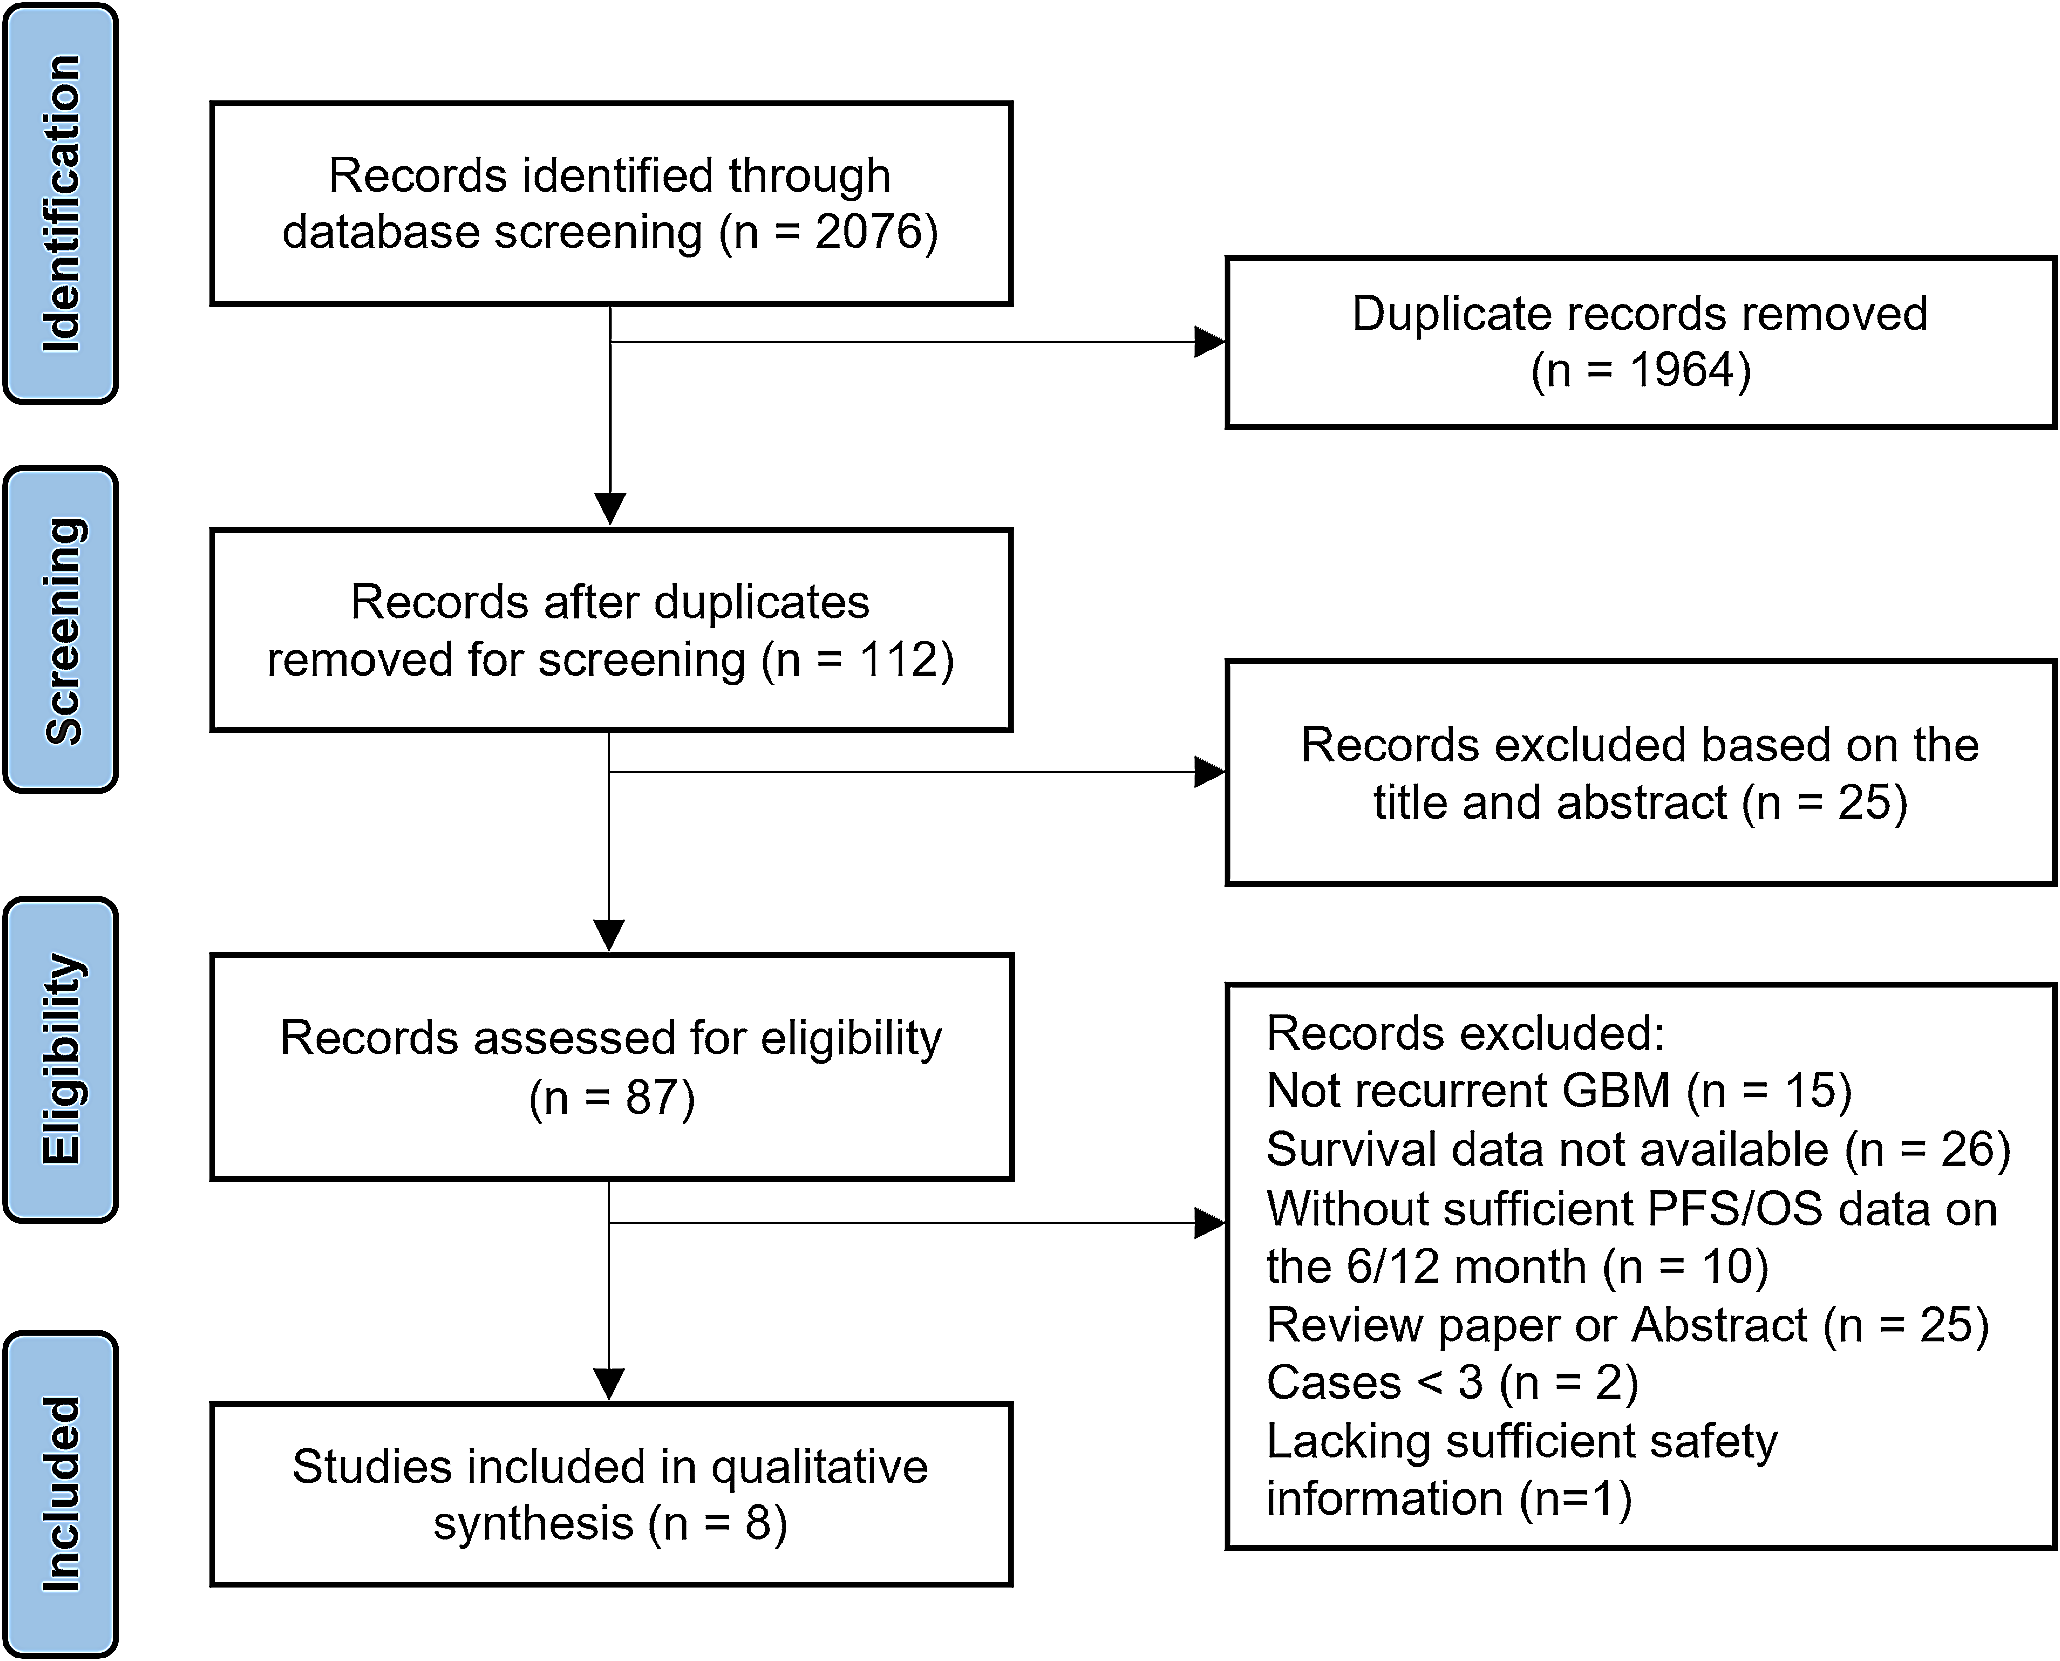 Laser interstitial thermal therapy for recurrent glioblastomas: a systematic review and meta-analysis